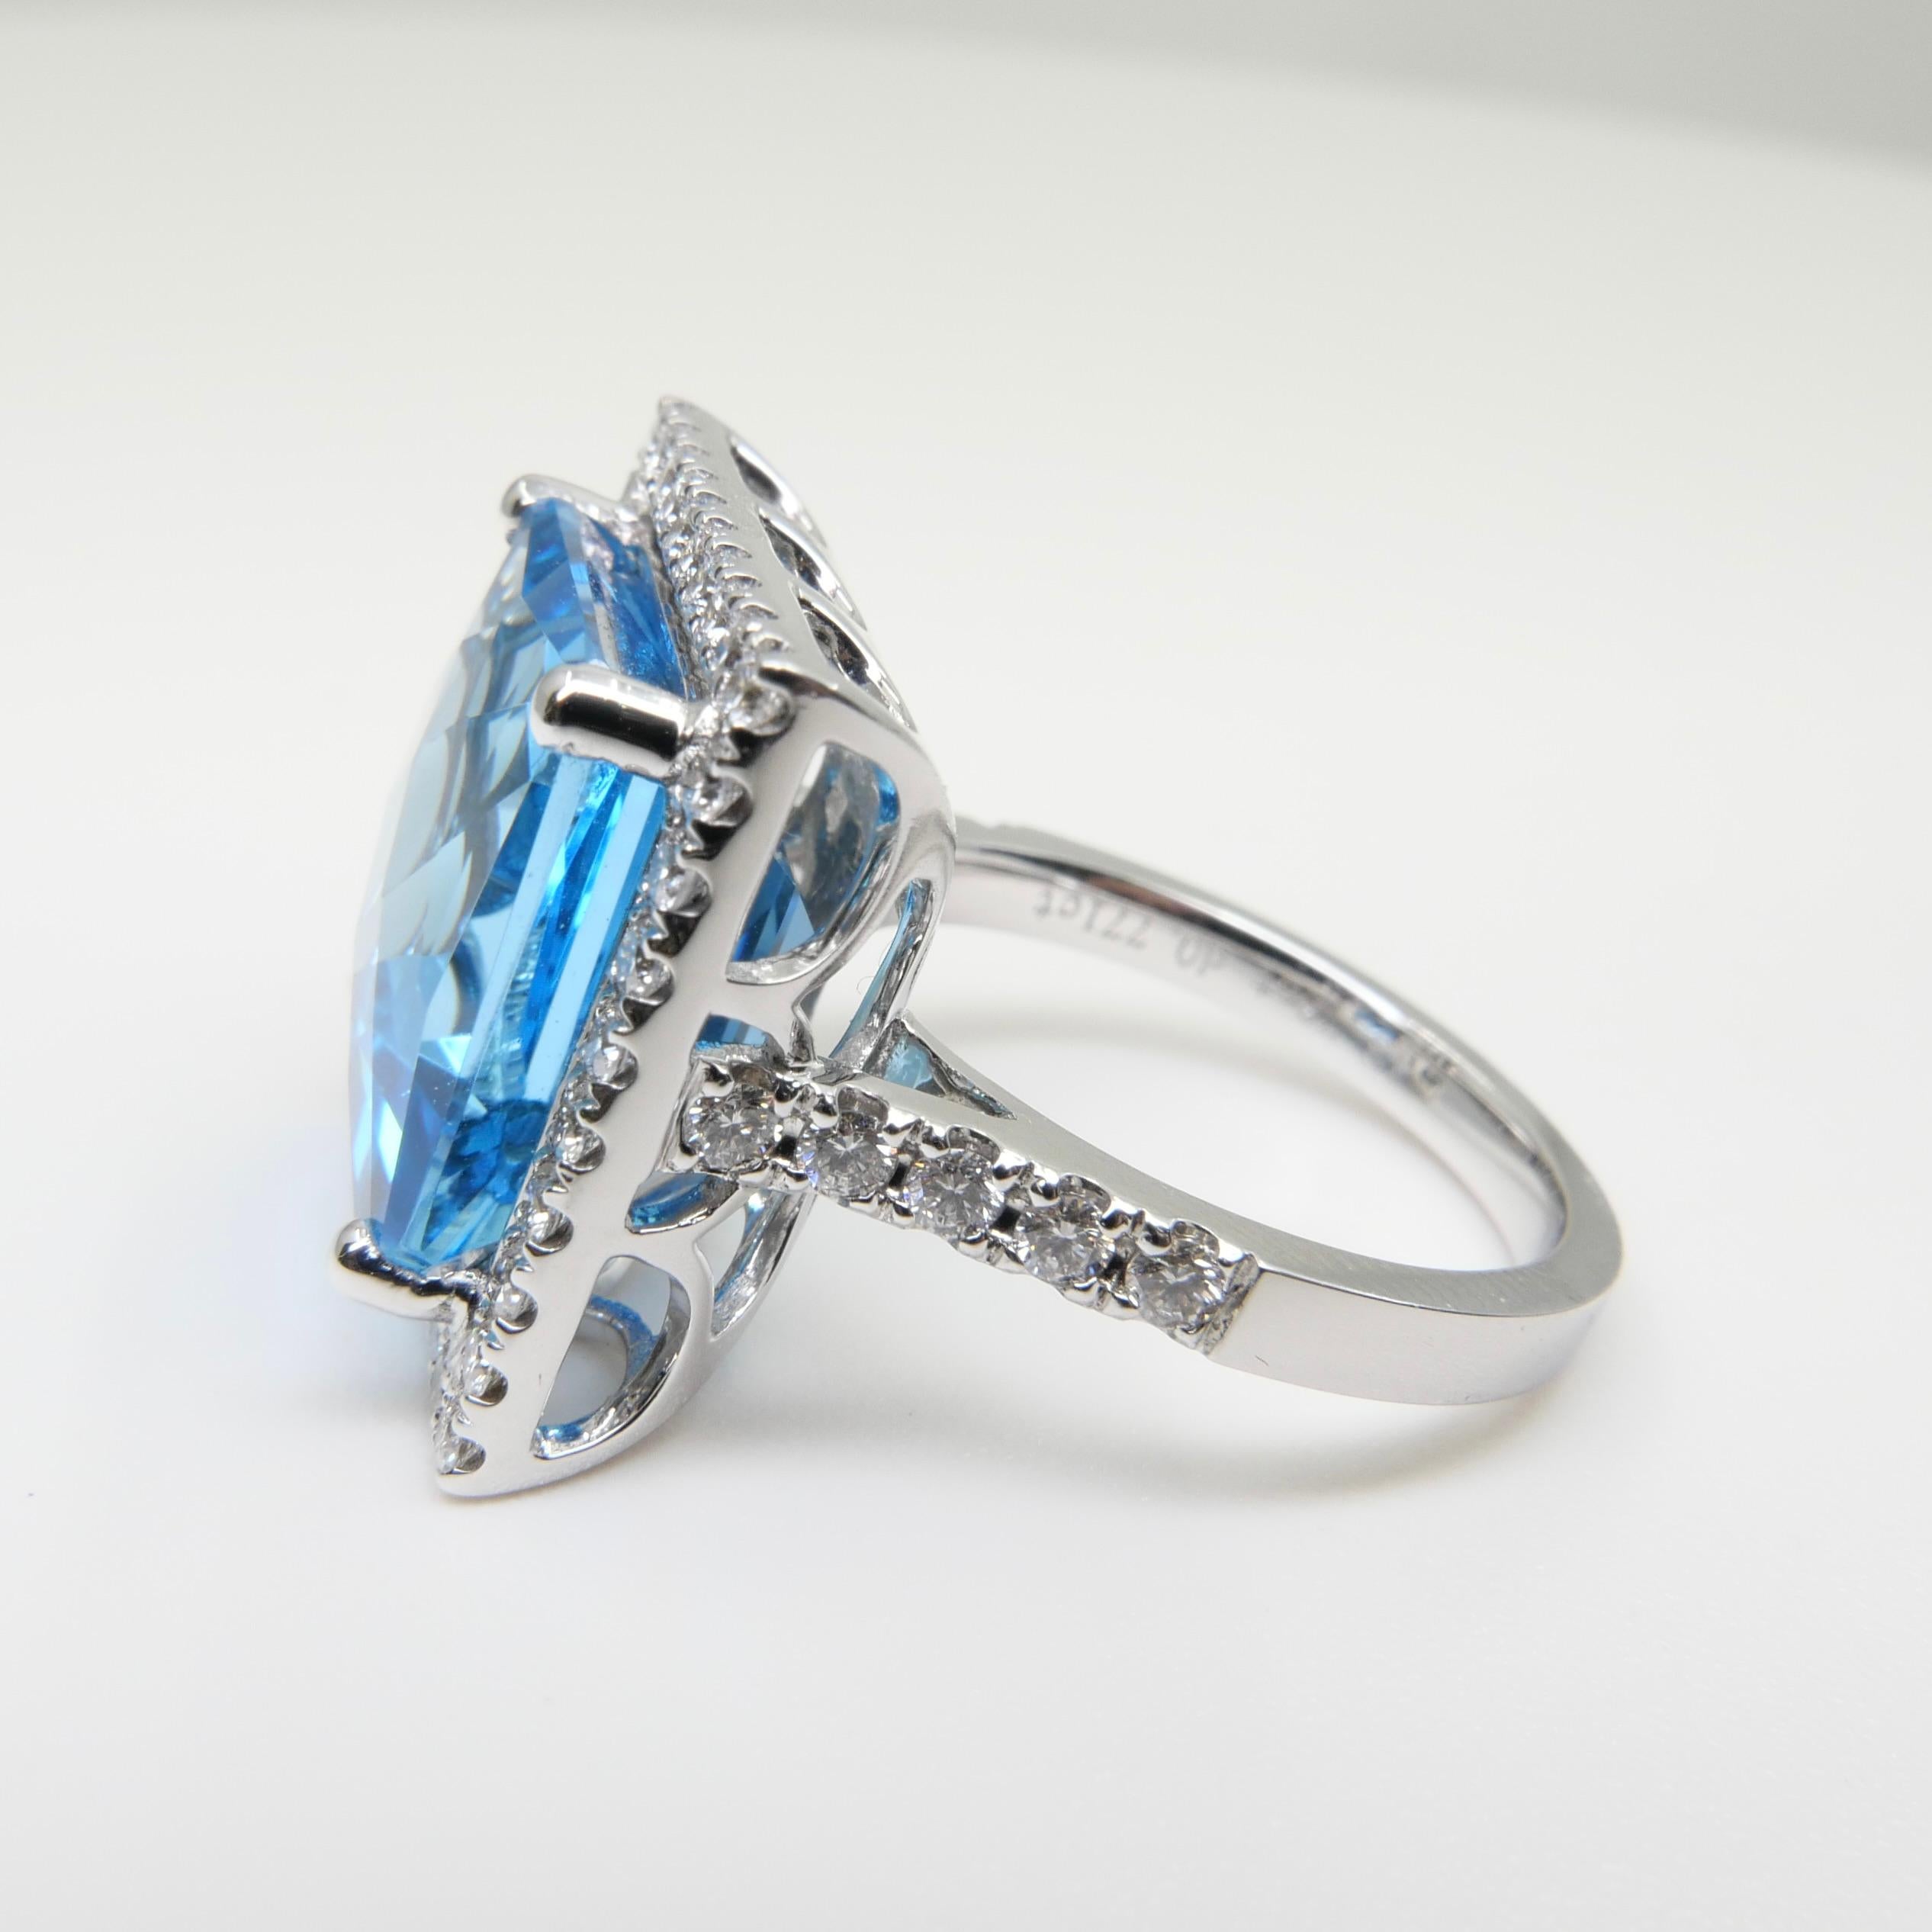  13 Cts checker Square Cut Blue Topaz & Diamond Cocktail Ring. Big Statement. For Sale 9